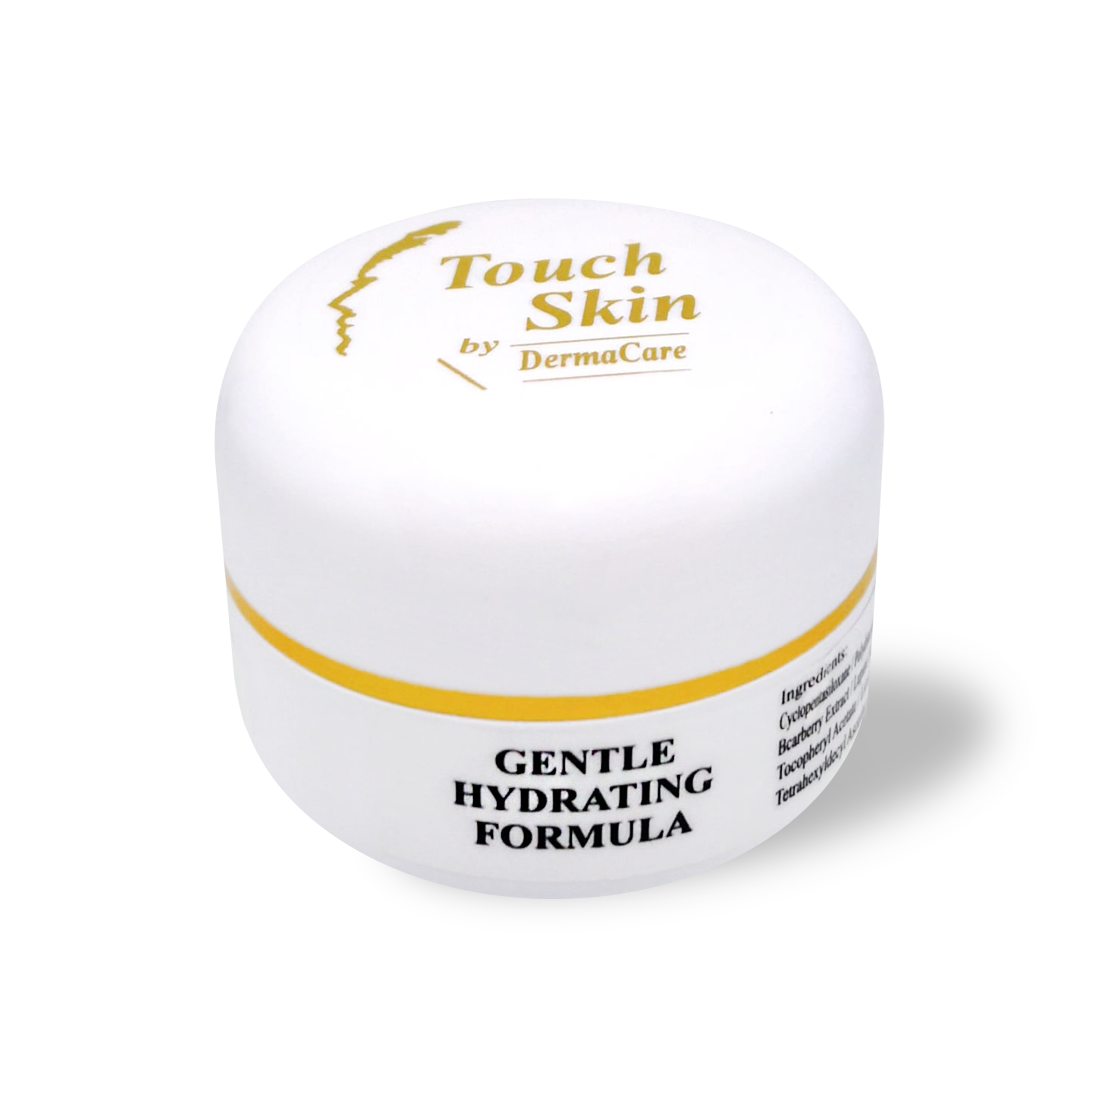 Gentle Hydrating Formula - Dermacare Therapeutic Skincare